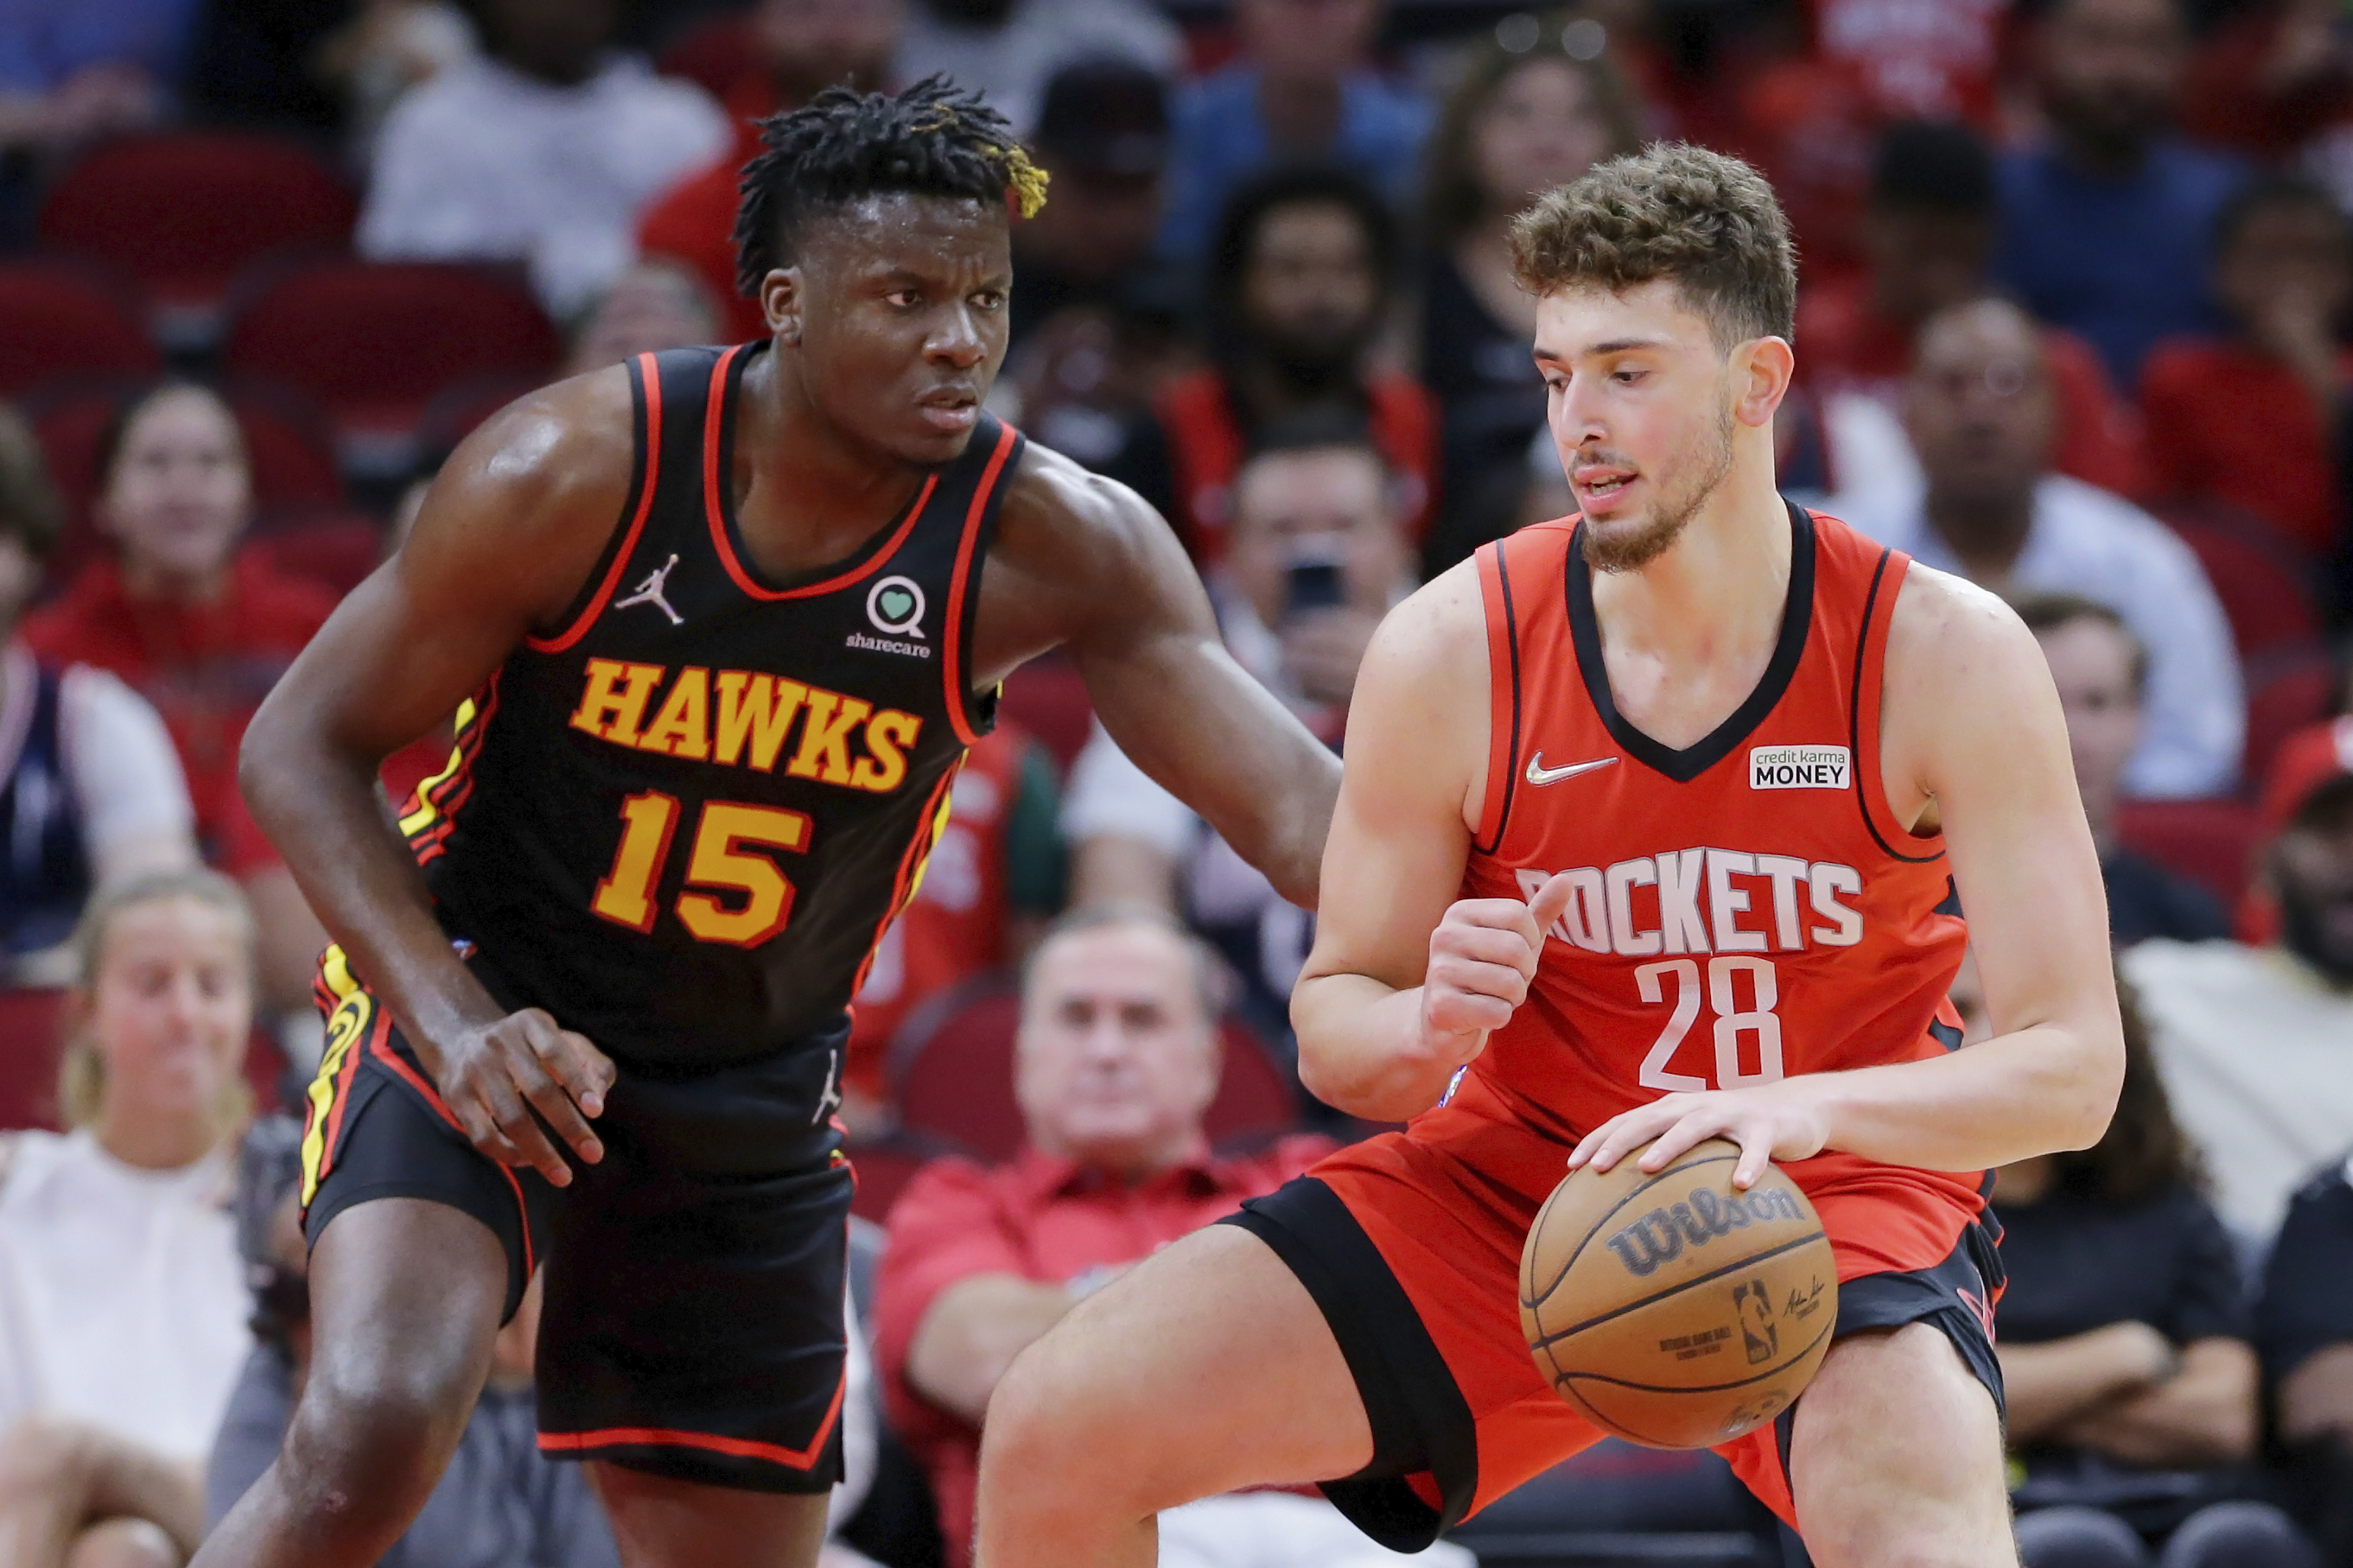 Hawks beat Rockets 130-114 but stay in 9th spot for play-in